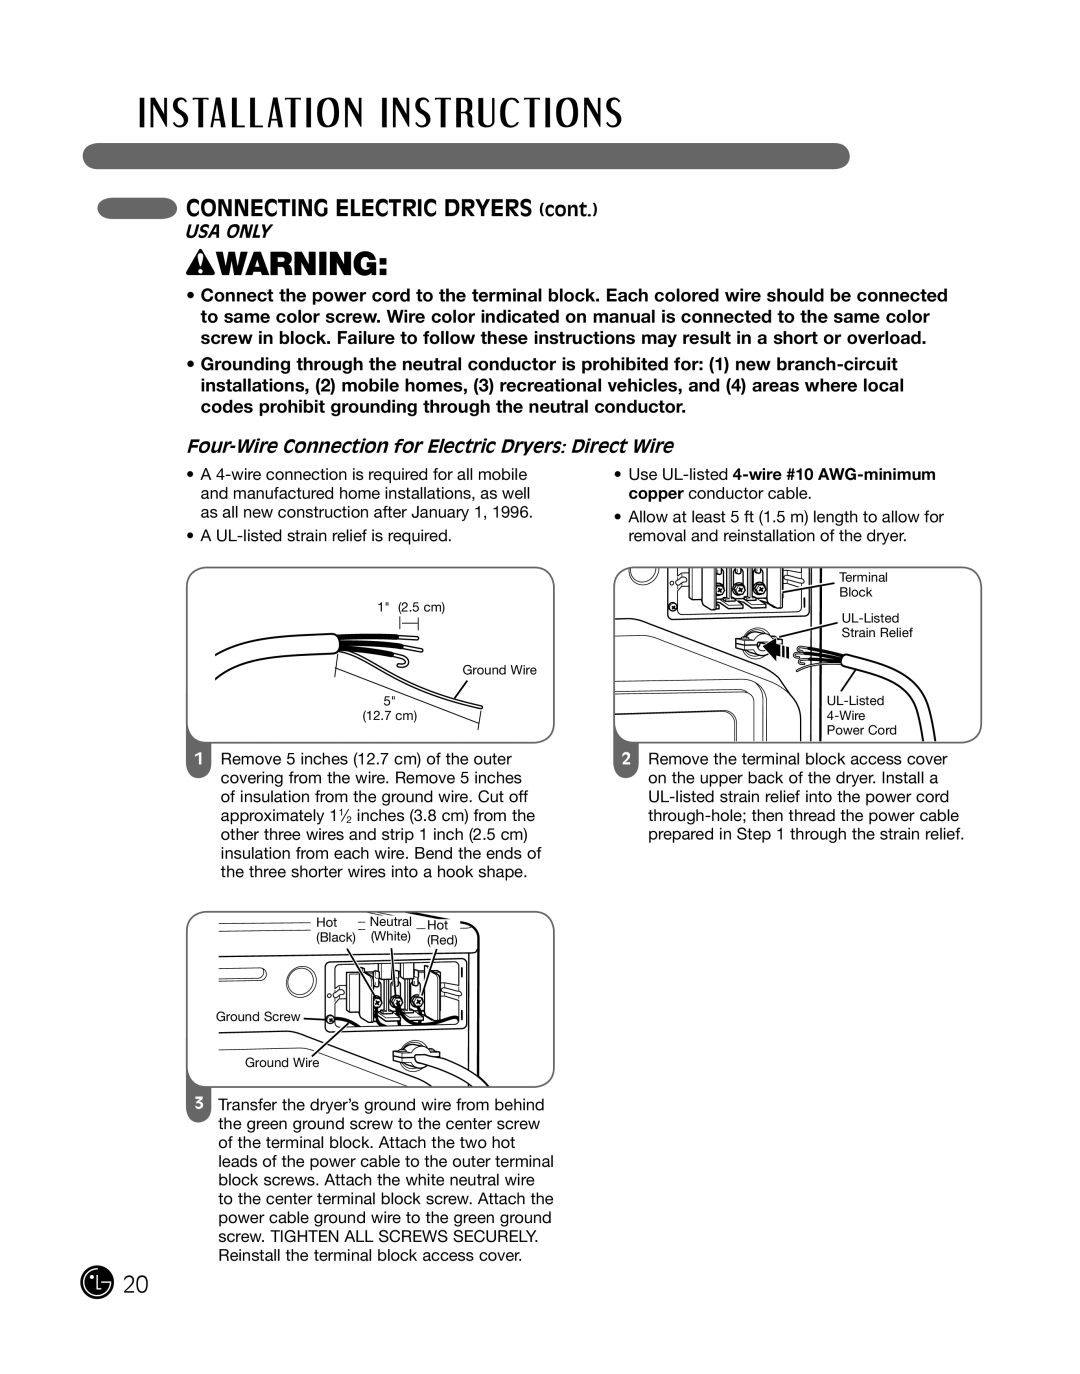 LG Electronics P154 manual Four-Wire Connection for Electric Dryers Direct Wire, wWARNING, CONNECTING ELECTRIC DRYERS cont 